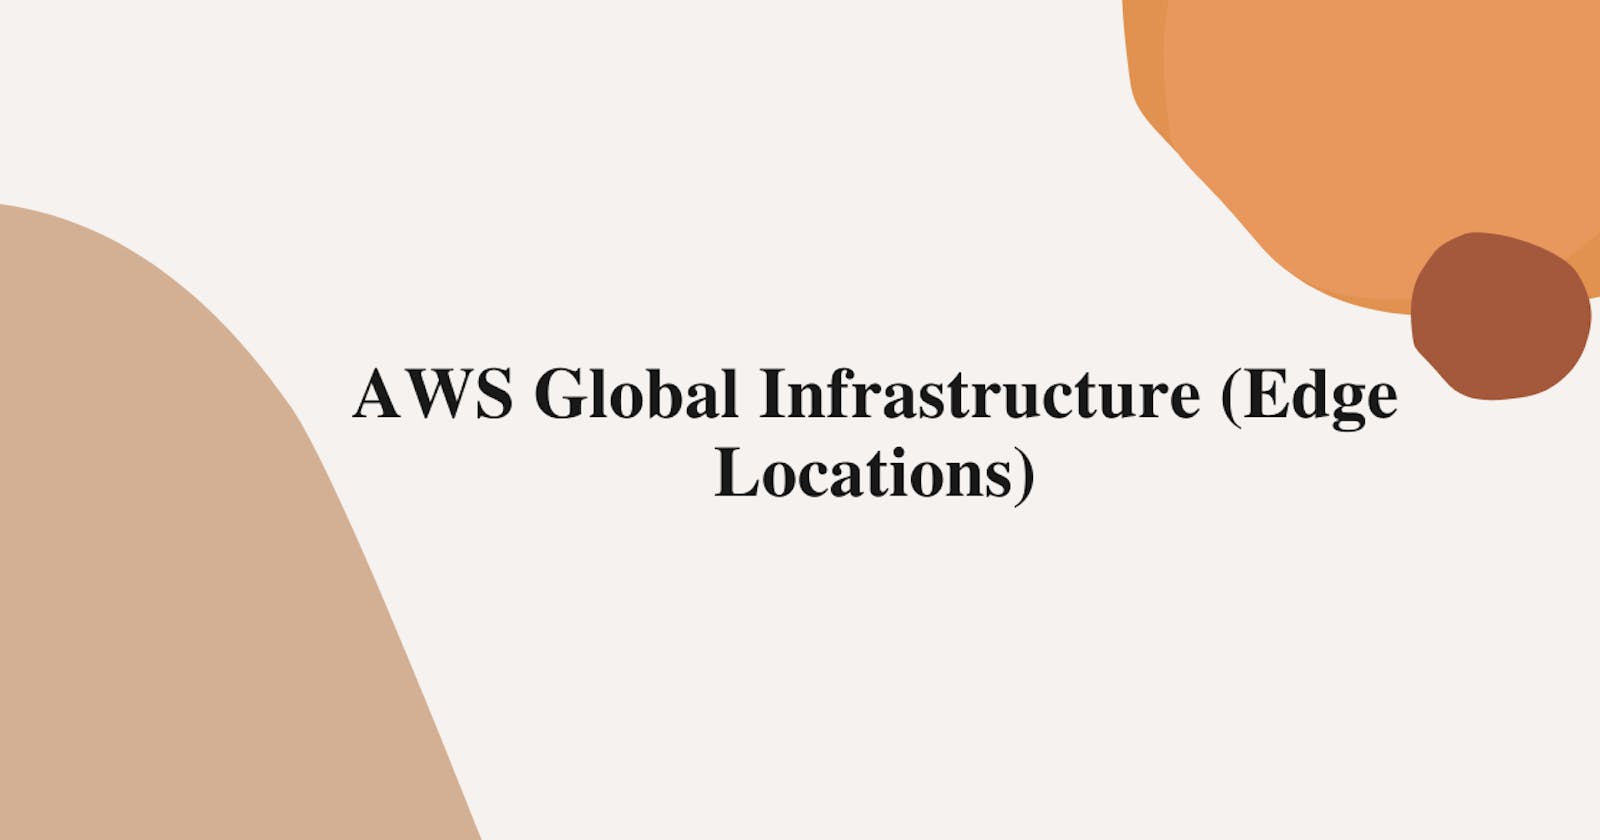 AWS Global Infrastructure (Edge Locations)